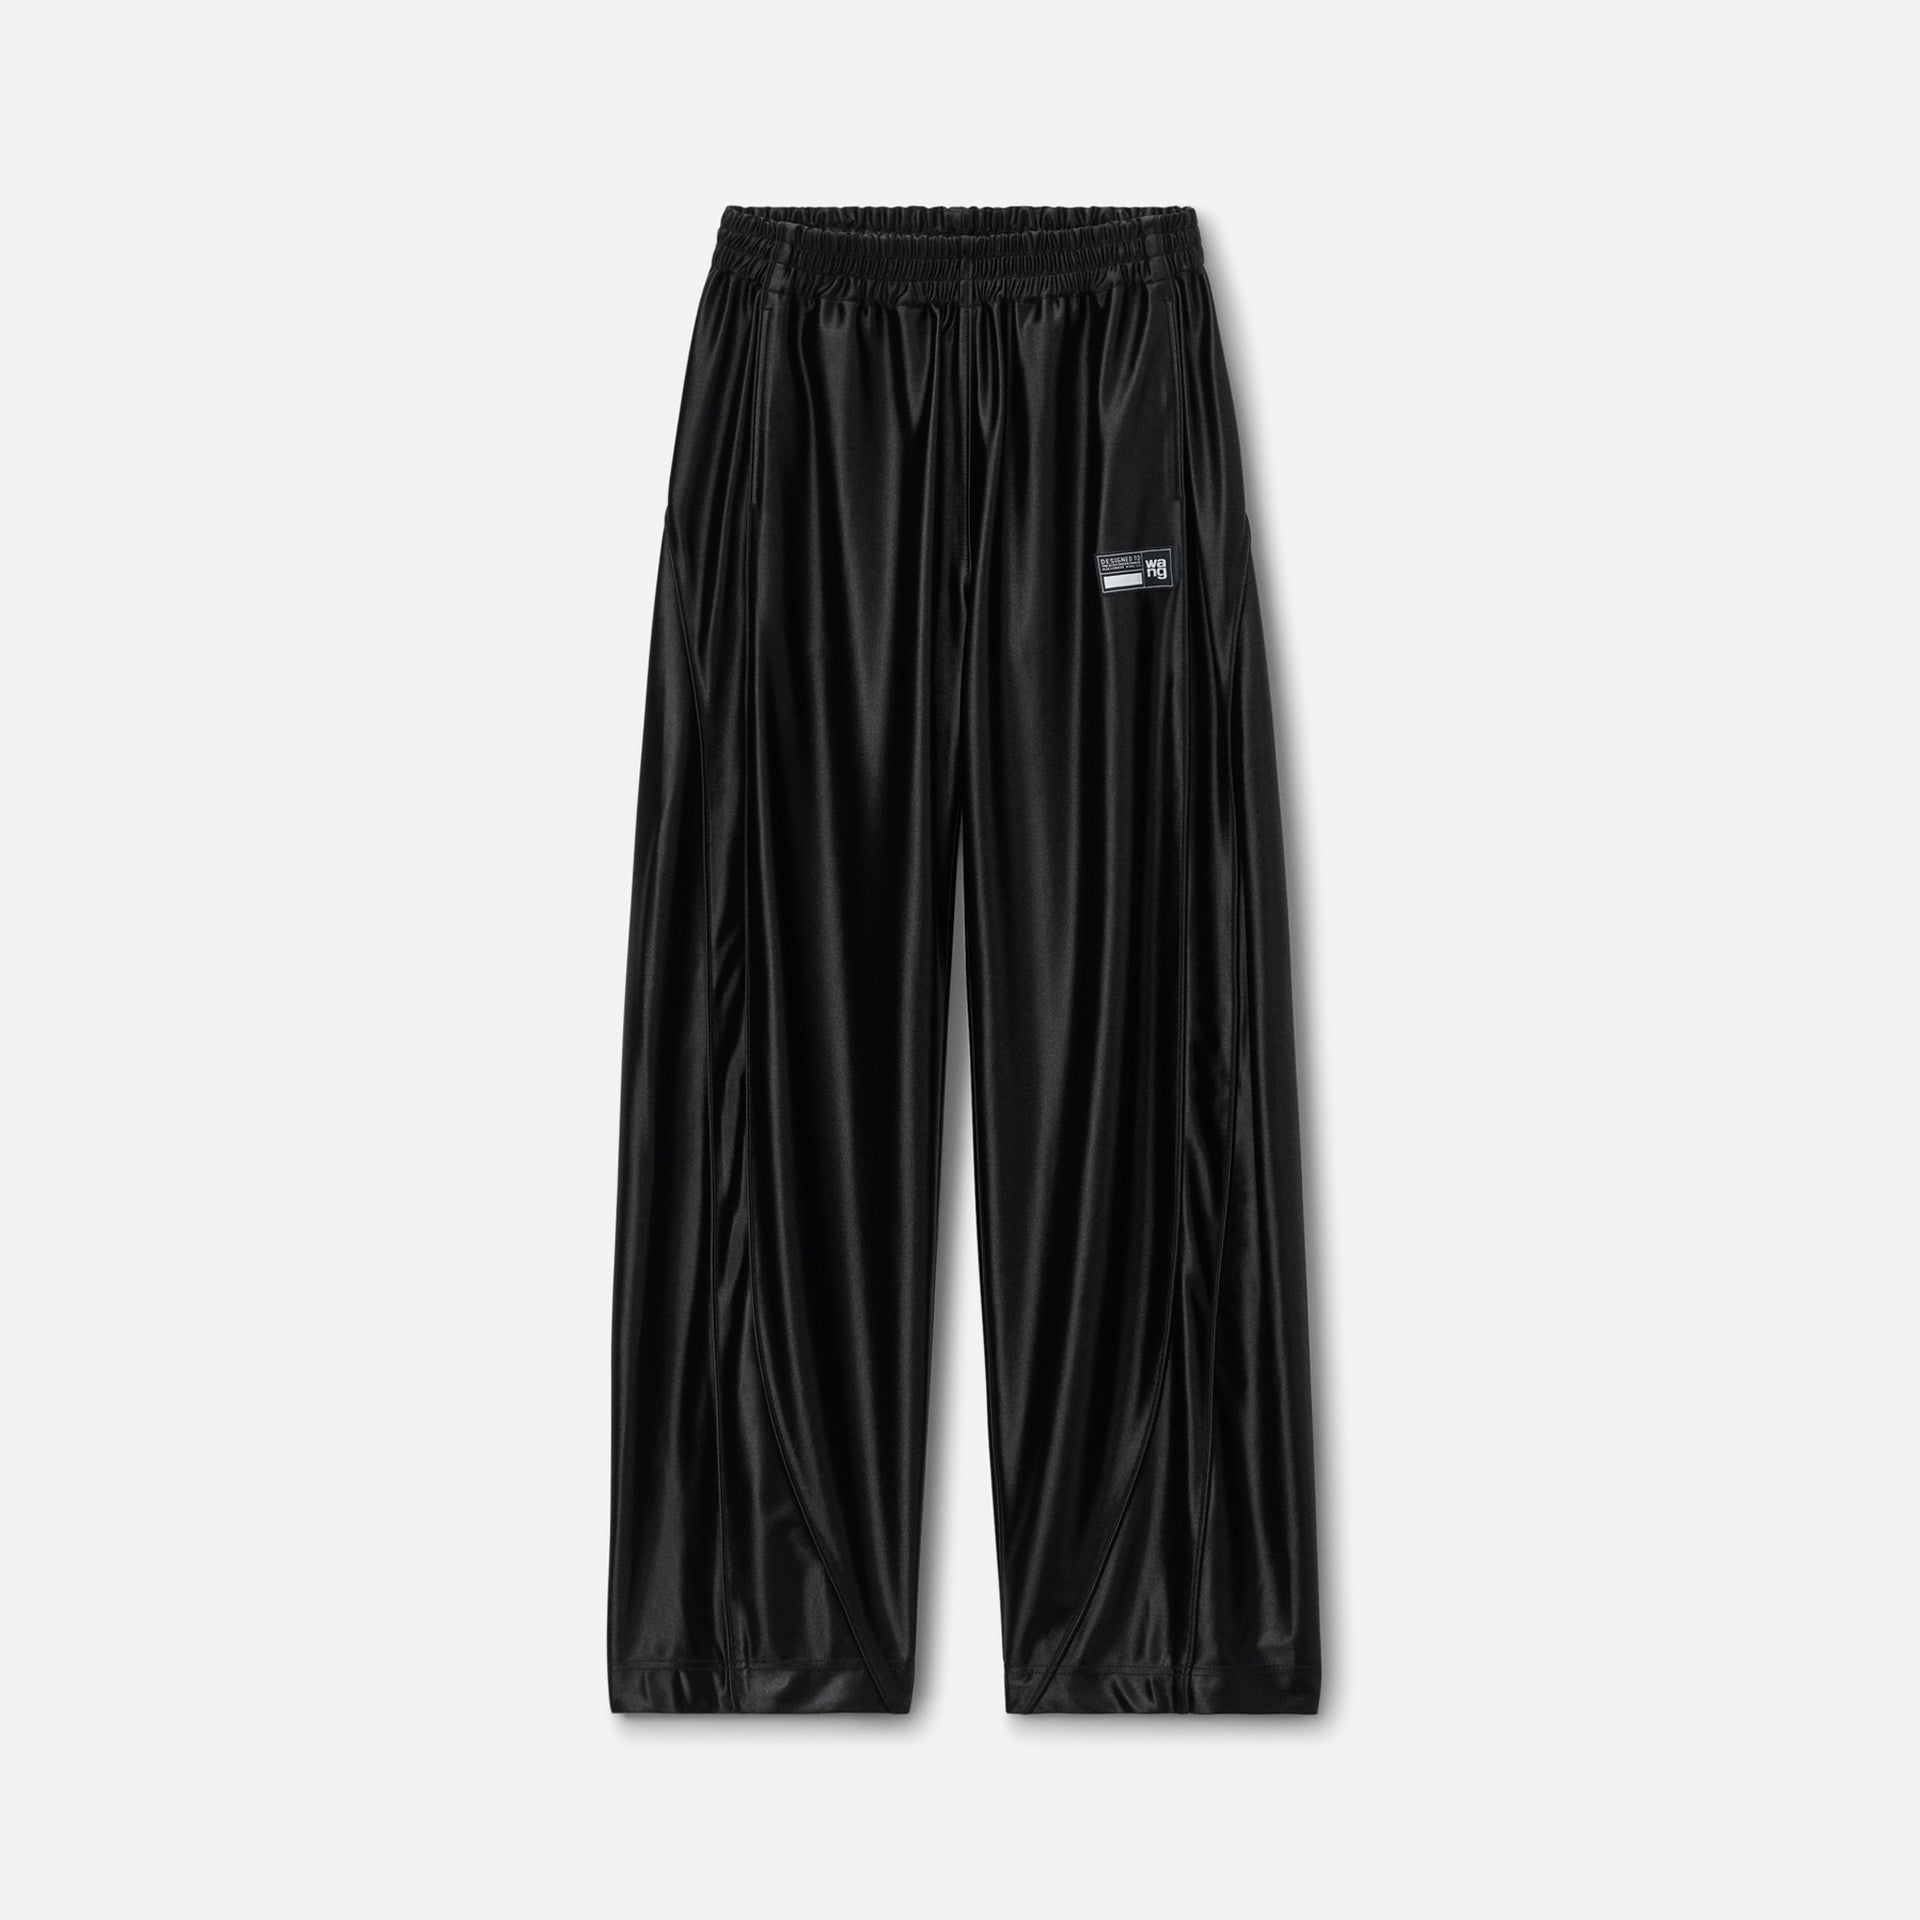 T by Alexander Wang Trackpant with Piping - Black